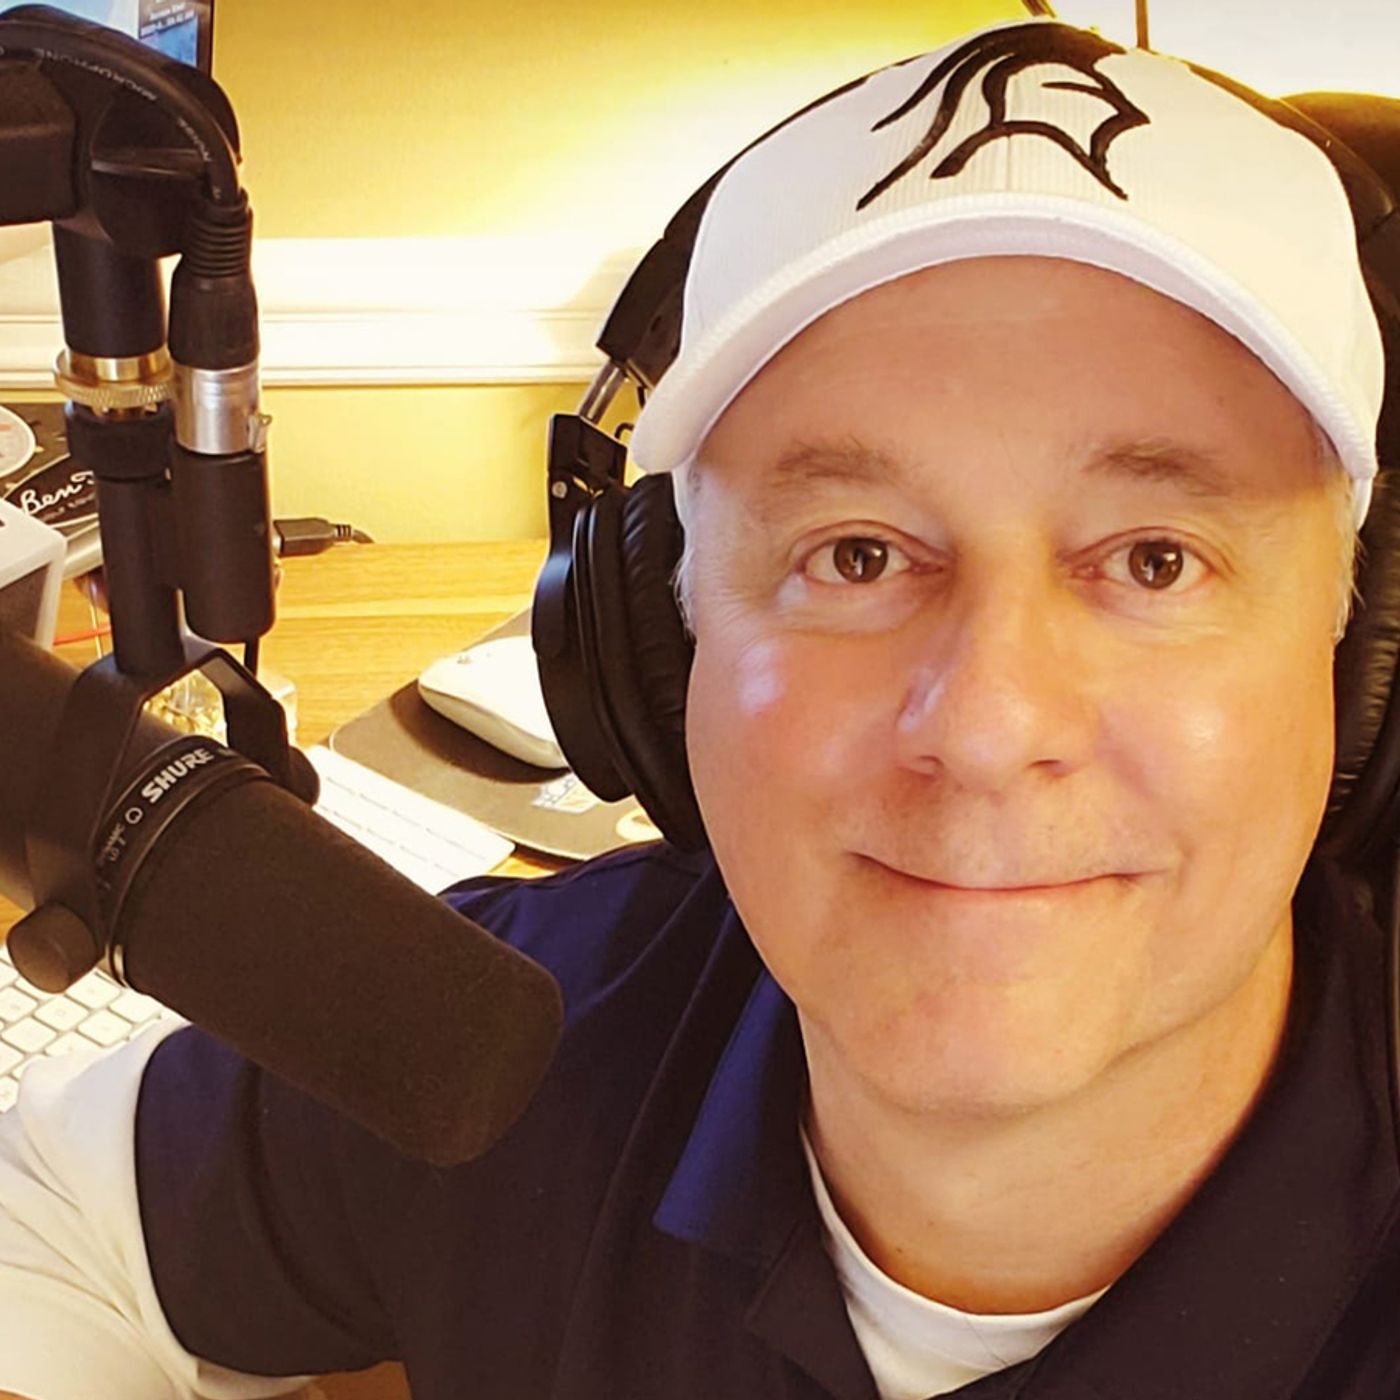 Ep. 161: “Next on the Tee” voice Chris Mascaro talks golf, podcasts and more